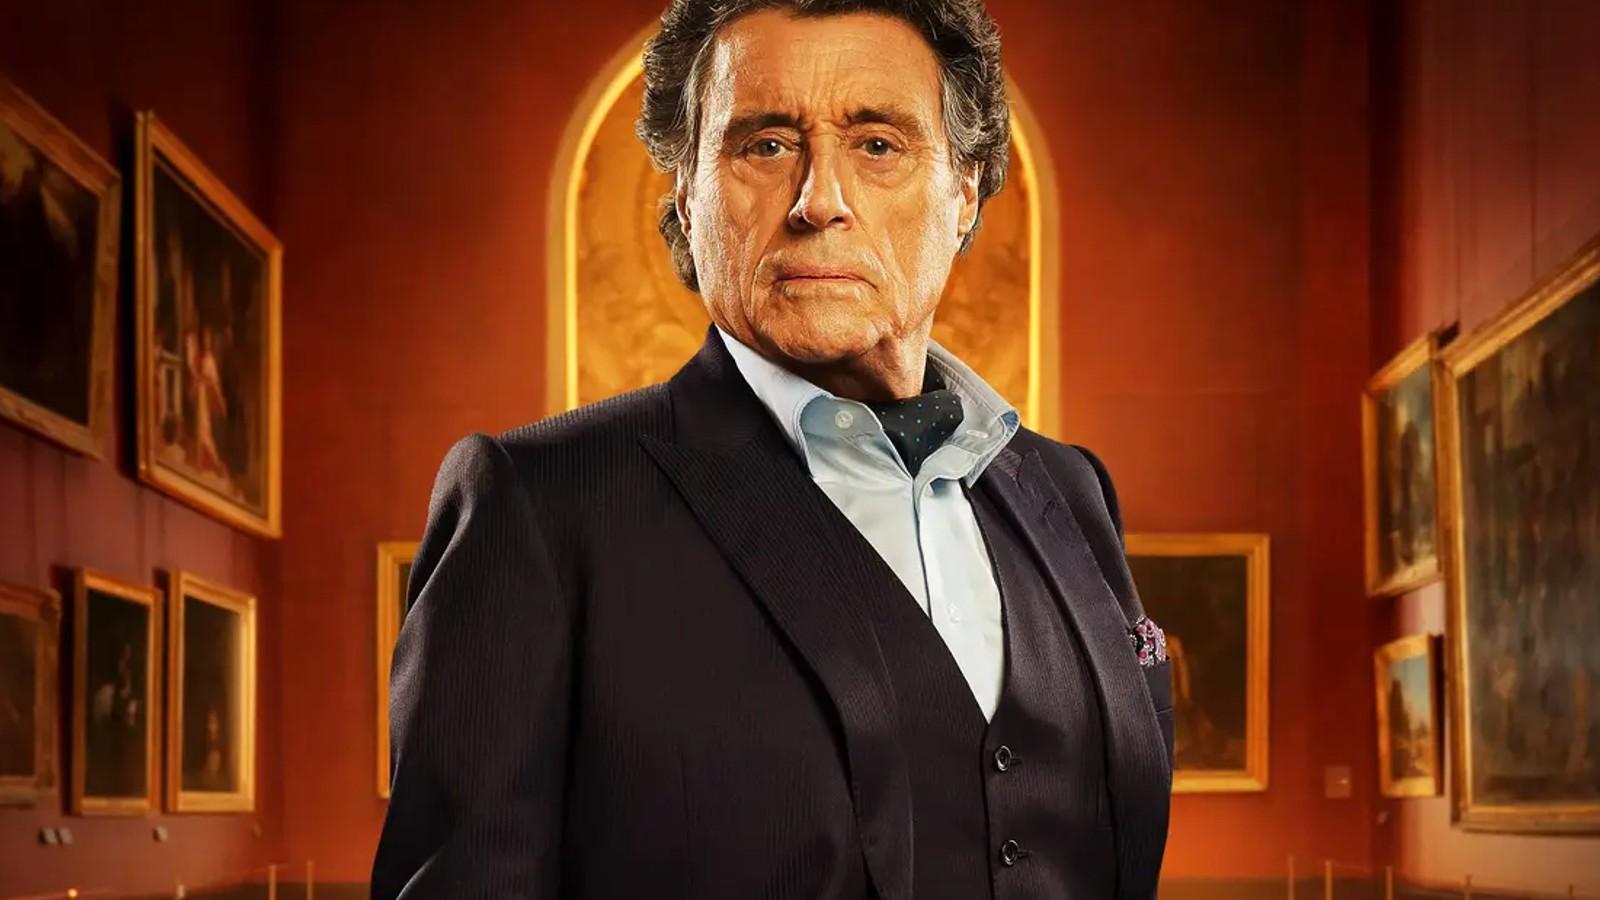 Ian McShane looking dapper in a suit in the John Wick movies.